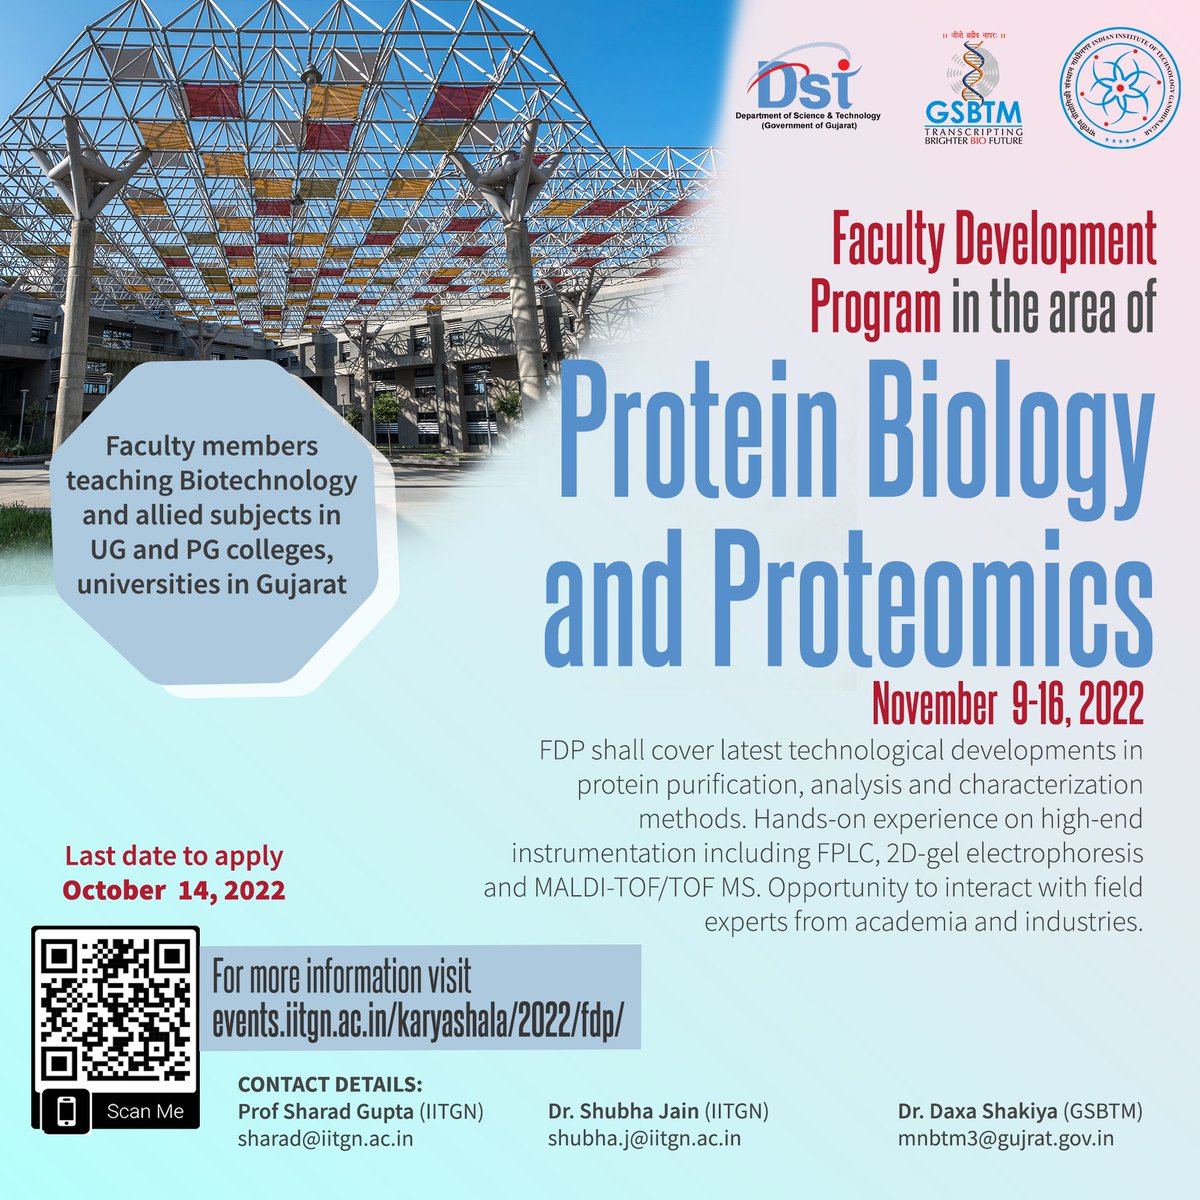 The @BiologicalEngi1 is organising a Faculty Development Program (FDP) in the area of “Protein Biology and Proteomics”, sponsored by @gsbtm, during November 9-16, 2022.
For more information, visit: tinyurl.com/5r838uxt
#BiologicalEngineering #ProteinBiology #Proteomics